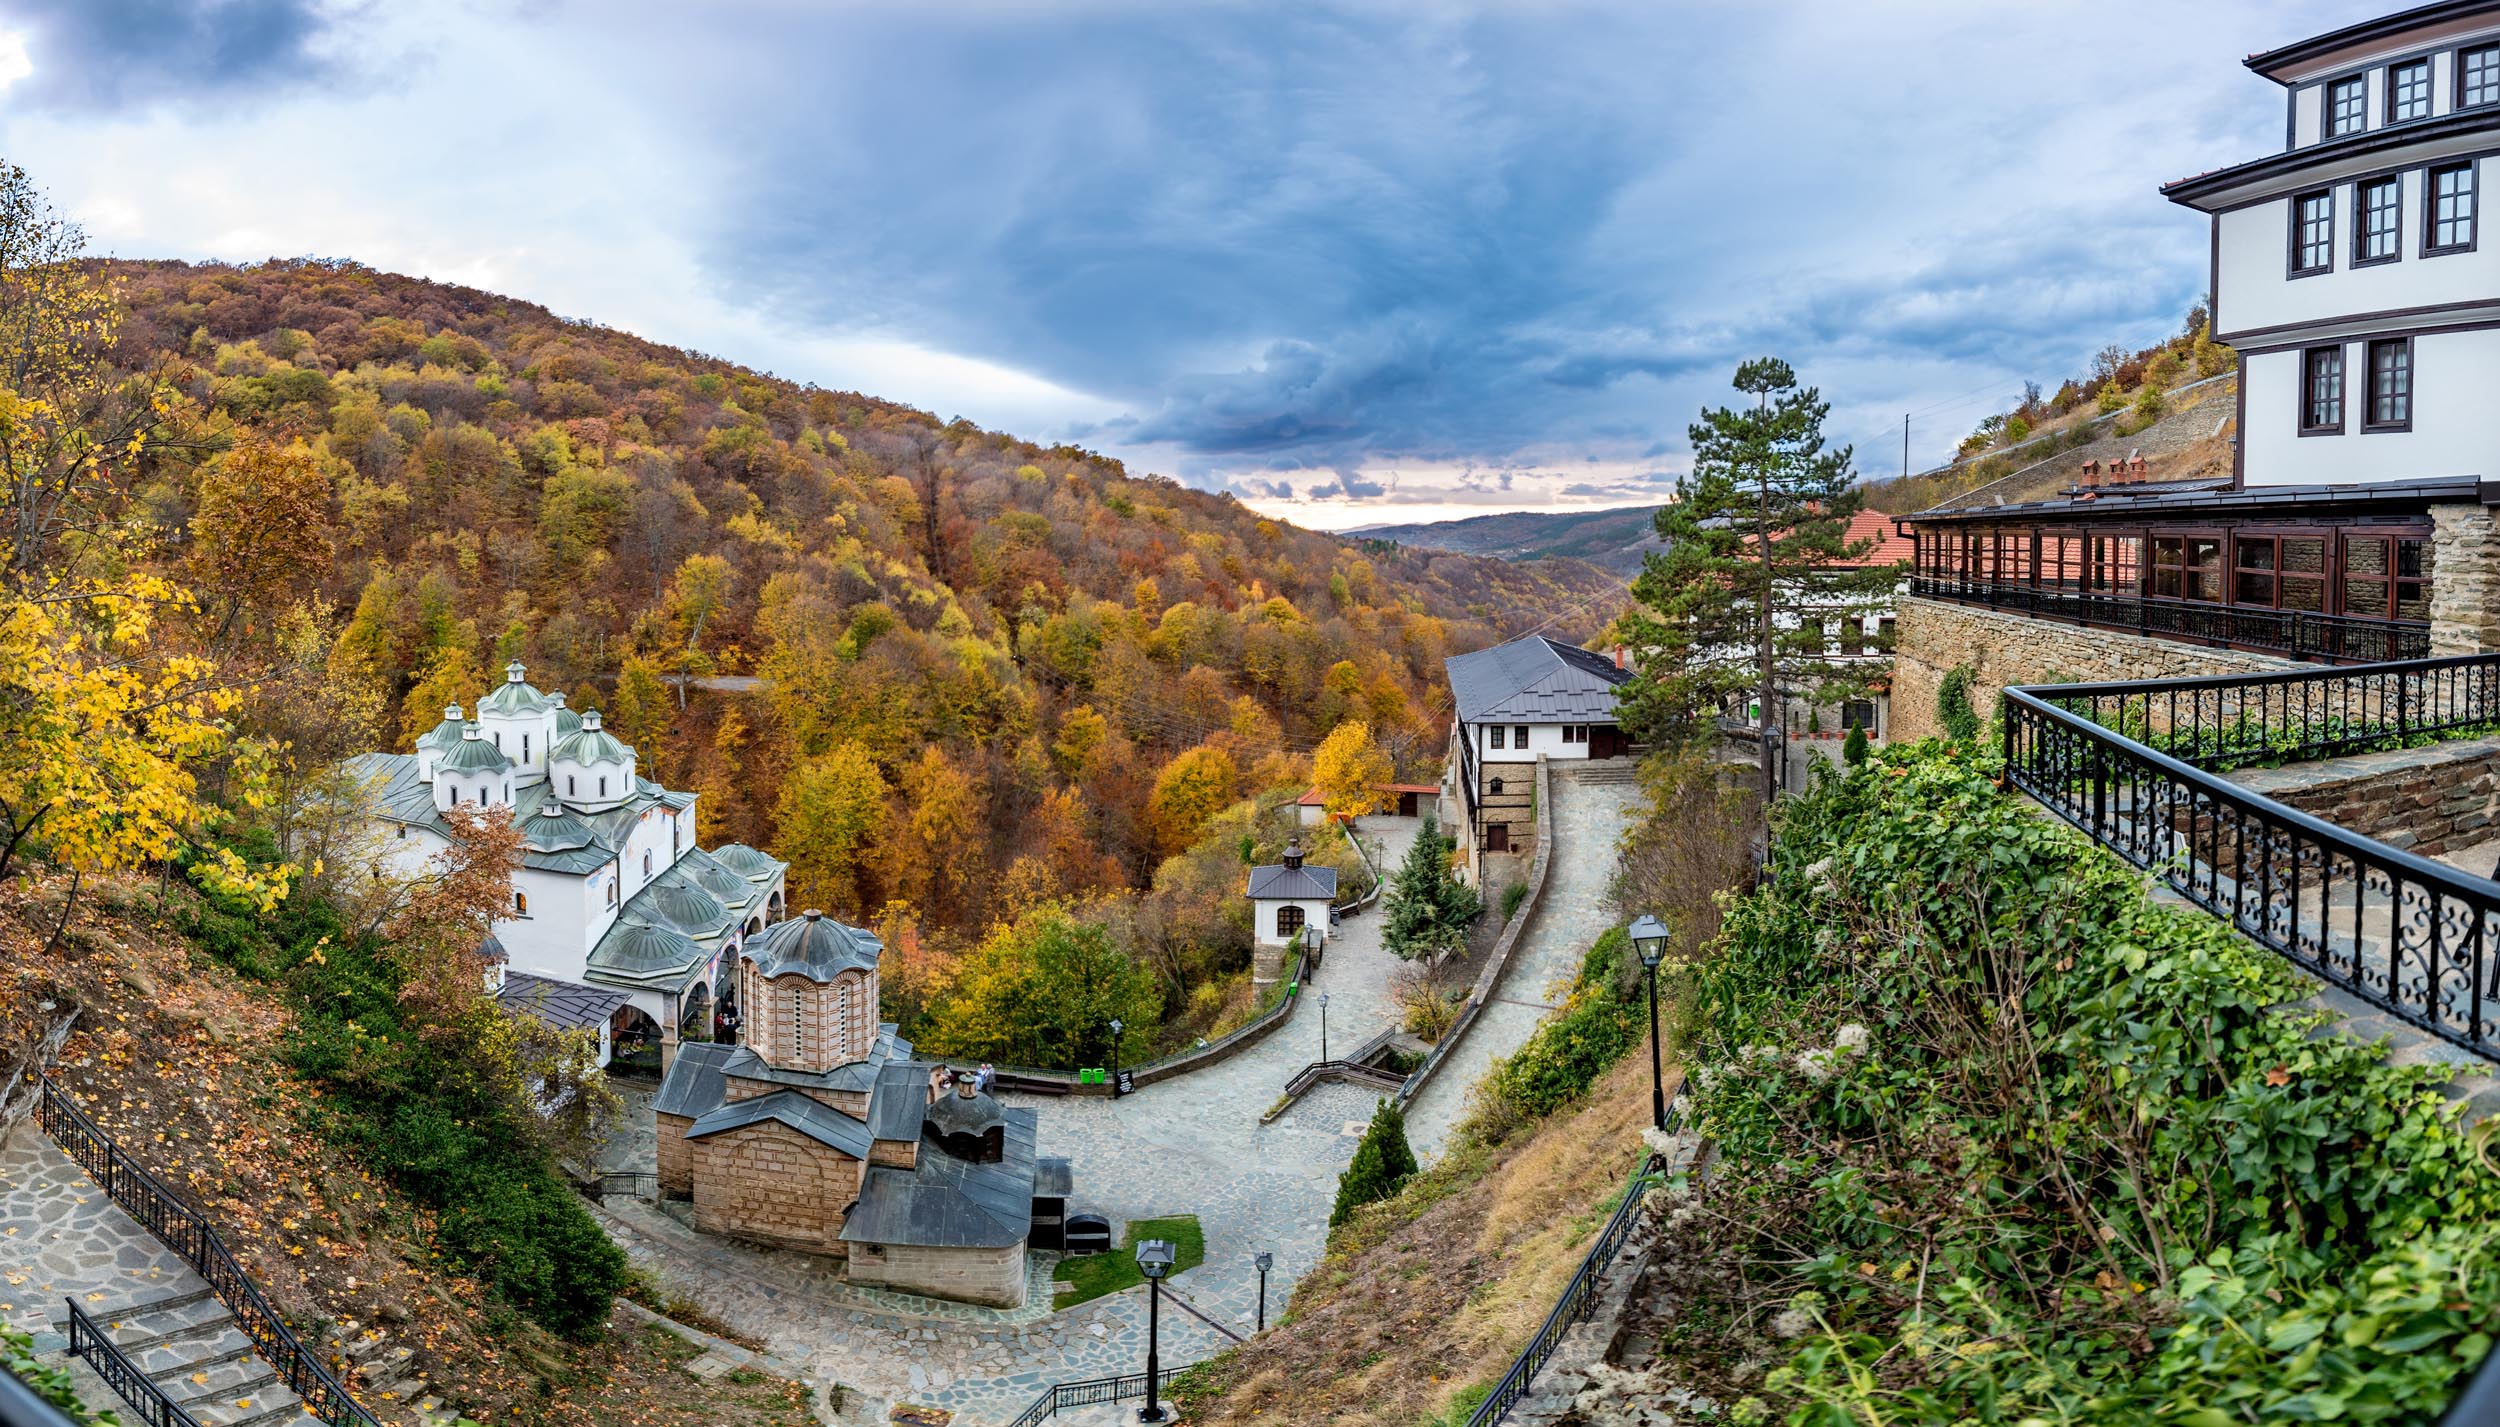 Landscape Photography Monastery in Macedonia